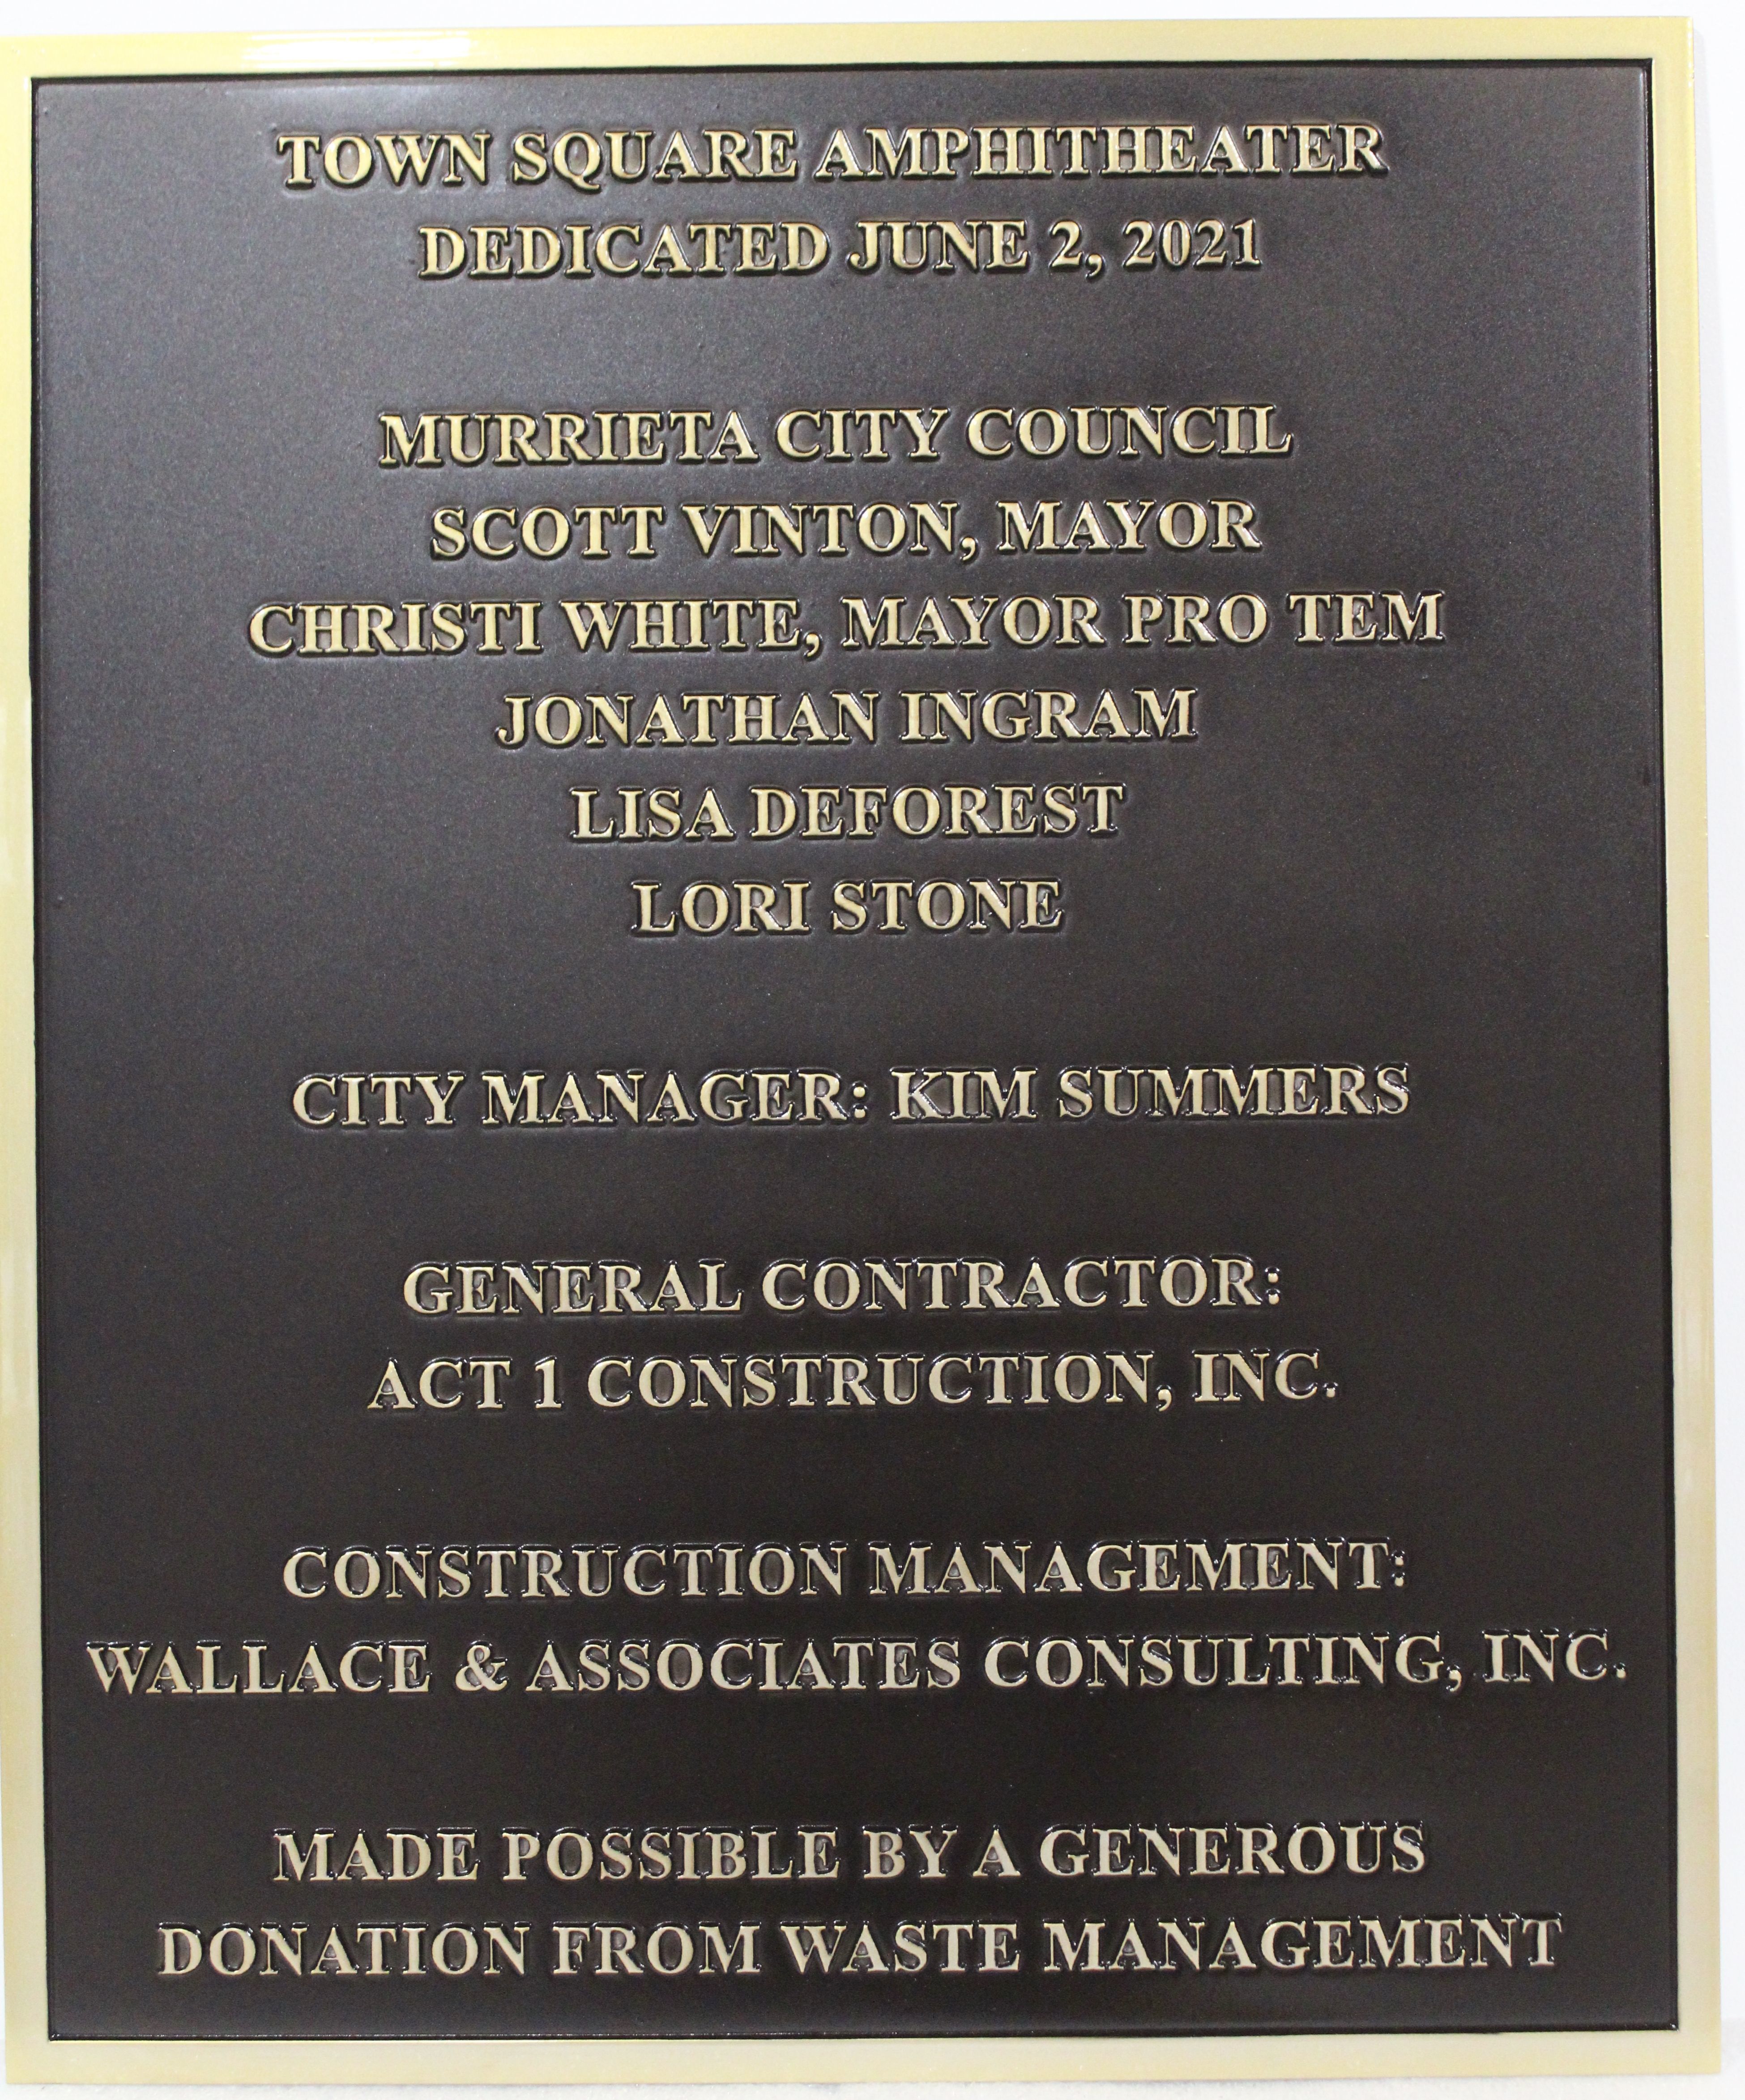 ZP-1115 - Carved Brass-Plated Dedication Plaque for the City of Murrieta's Town Square Amphitheater